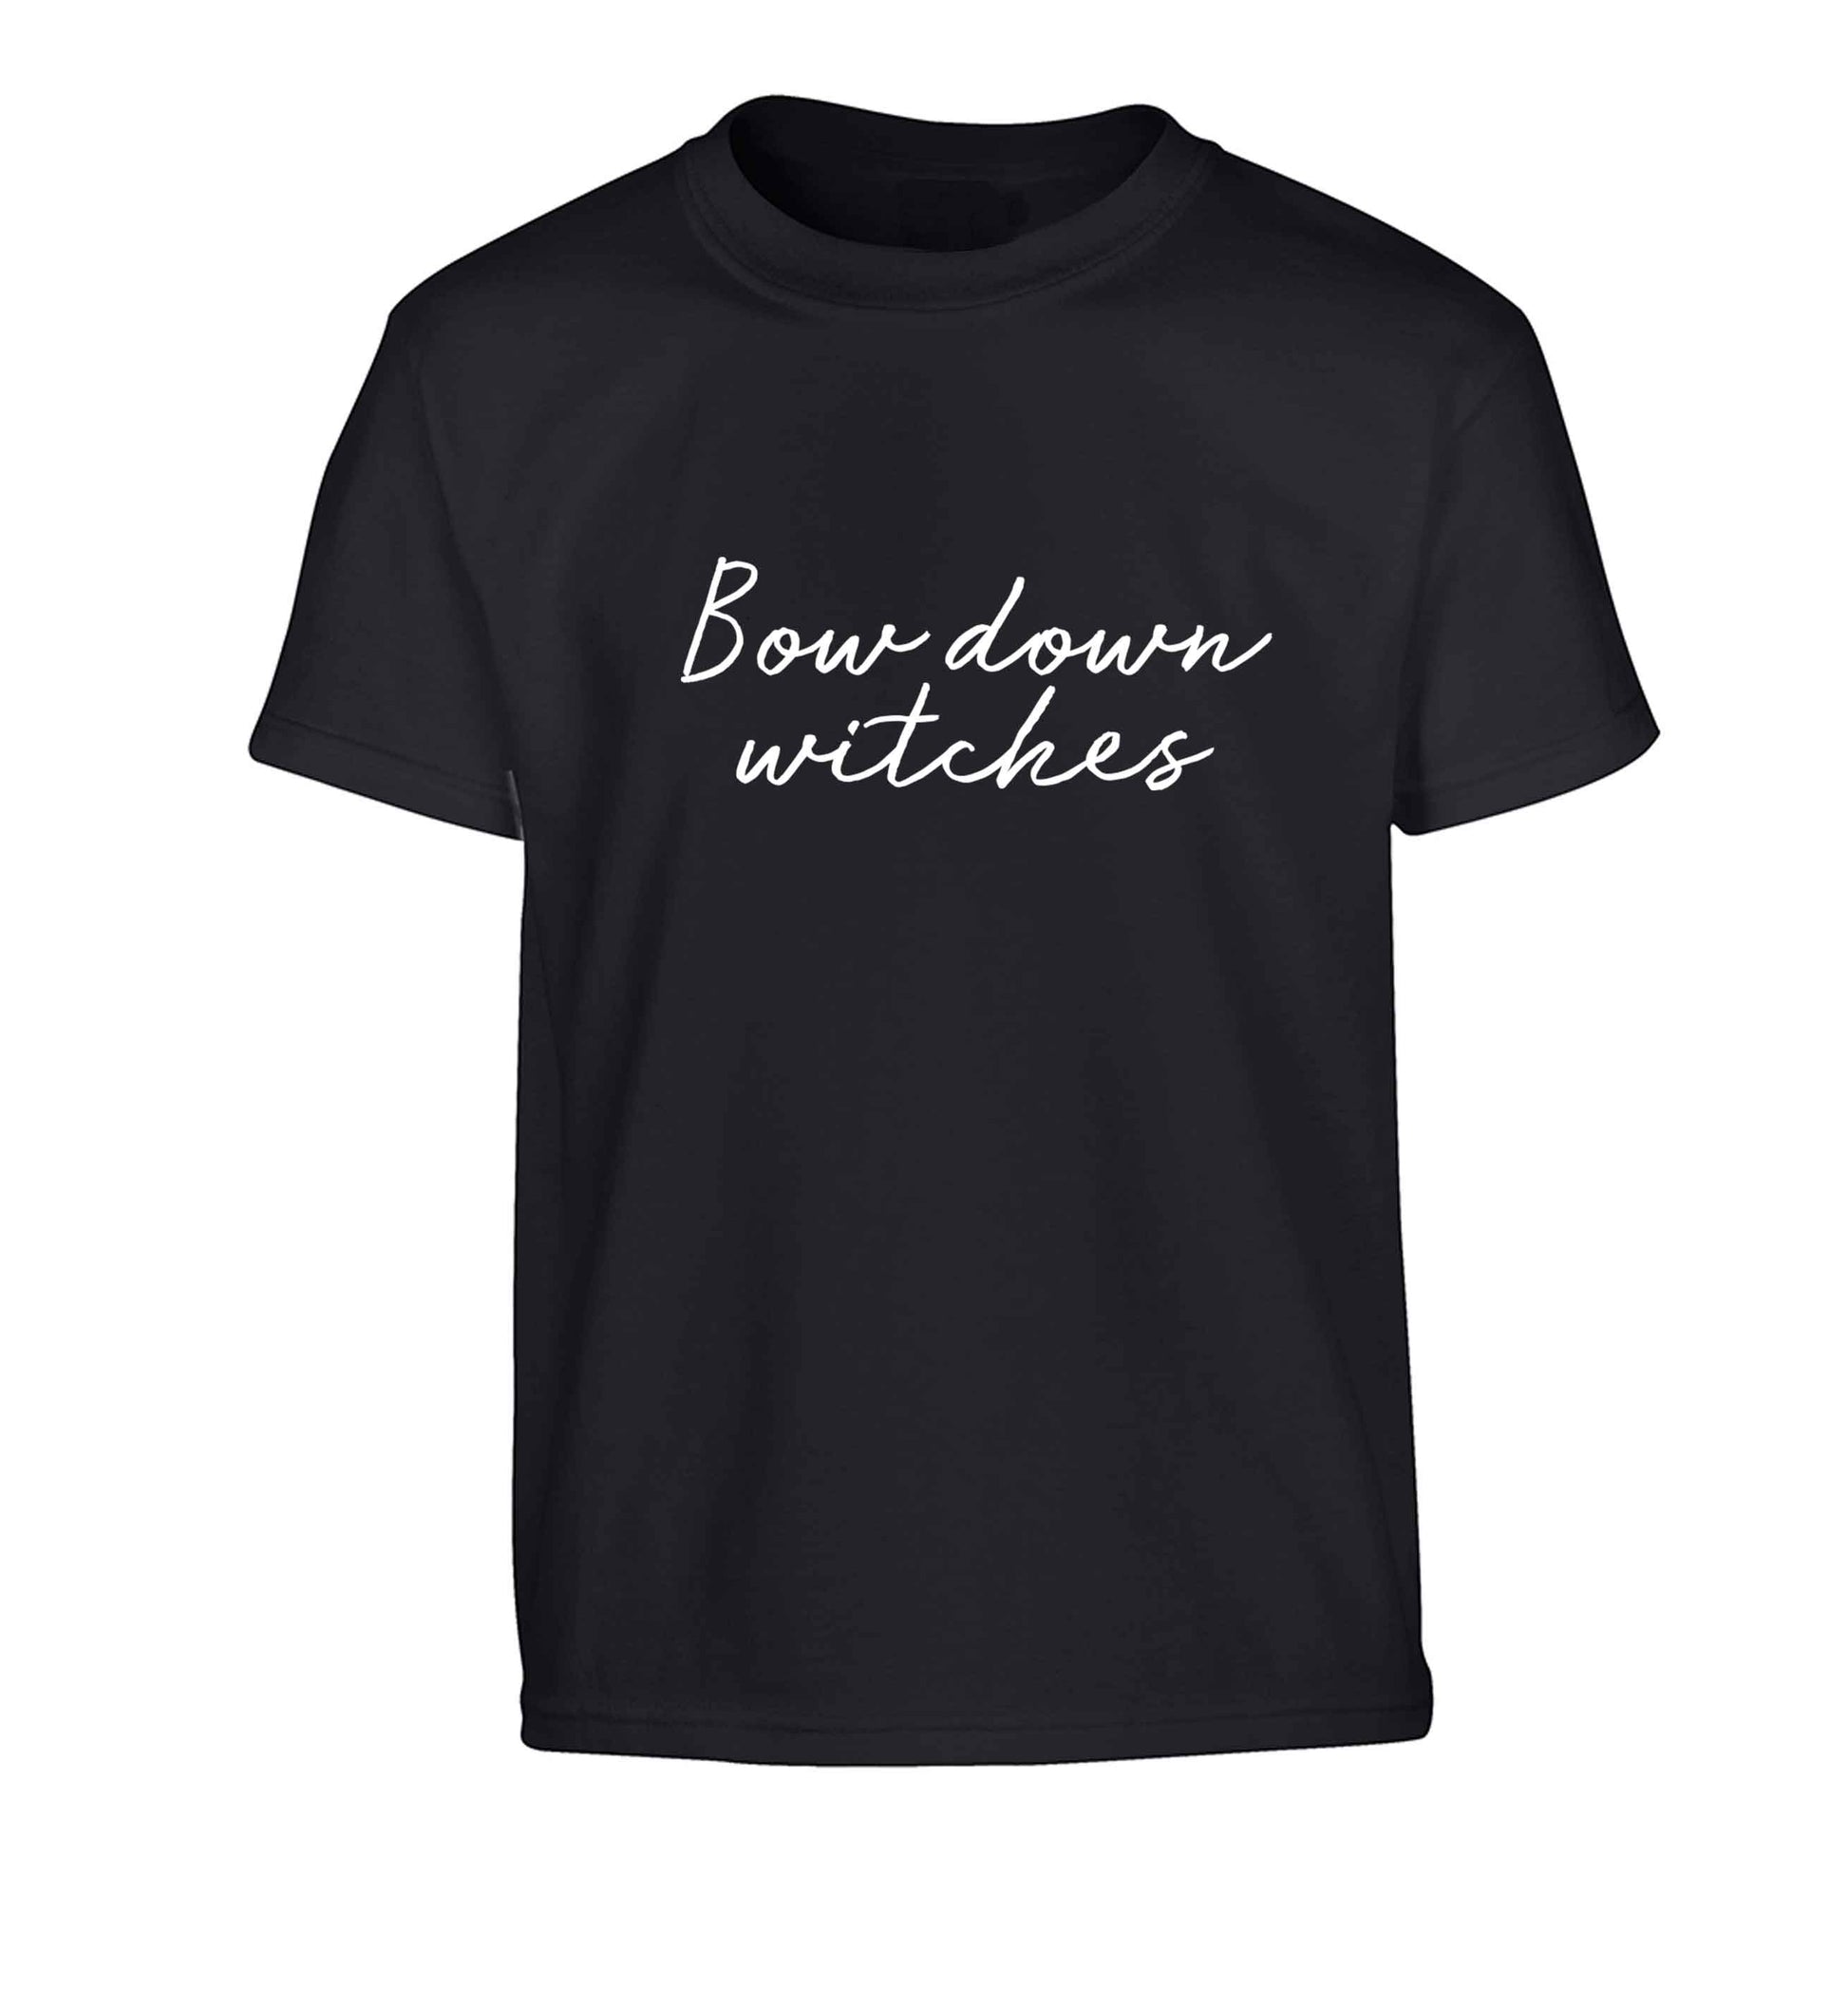 Bow down witches Children's black Tshirt 12-13 Years